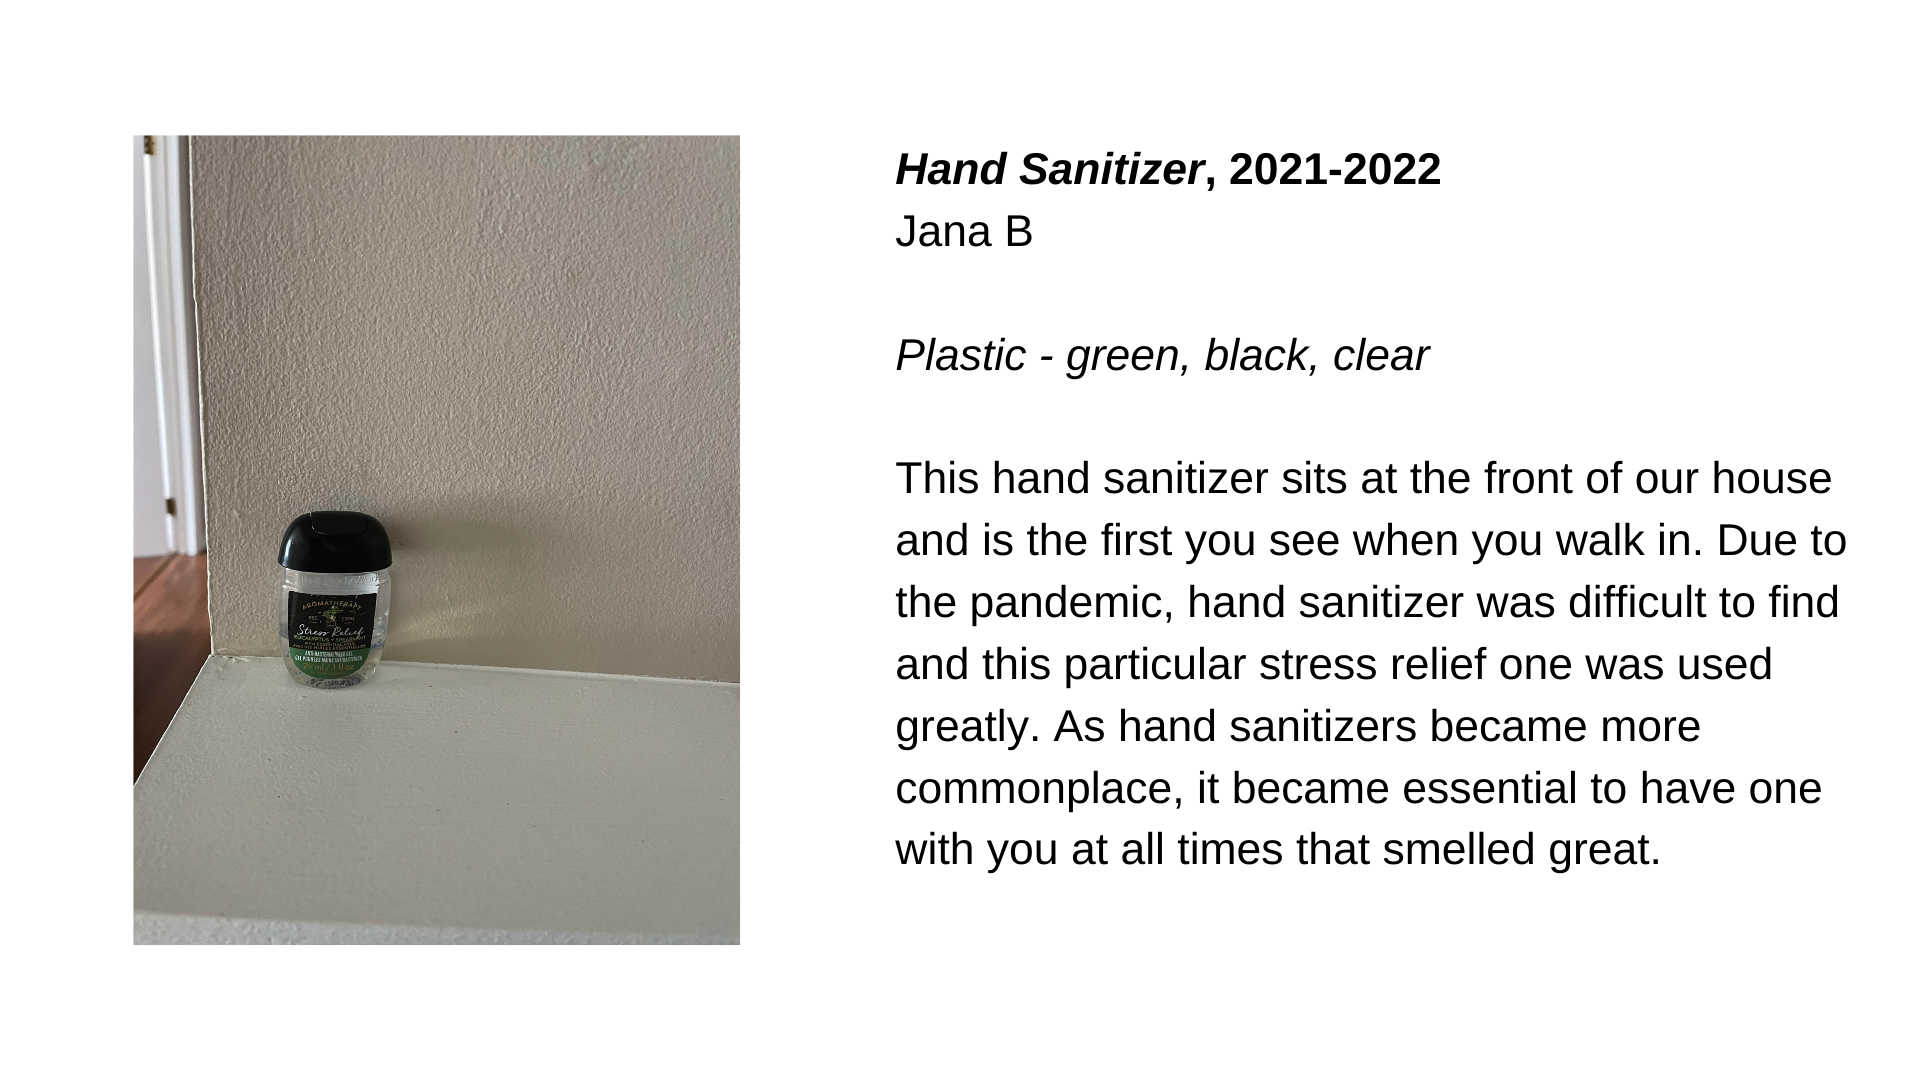  A small, portable bottle of hand sanitizer next to the text “Hand sanitizer, 2021-2022 - Jana B. Green, black, clear and plastic. This hand sanitizer sits at the front of our house and is the first you see when you walk in. Due to the pandemic, hand